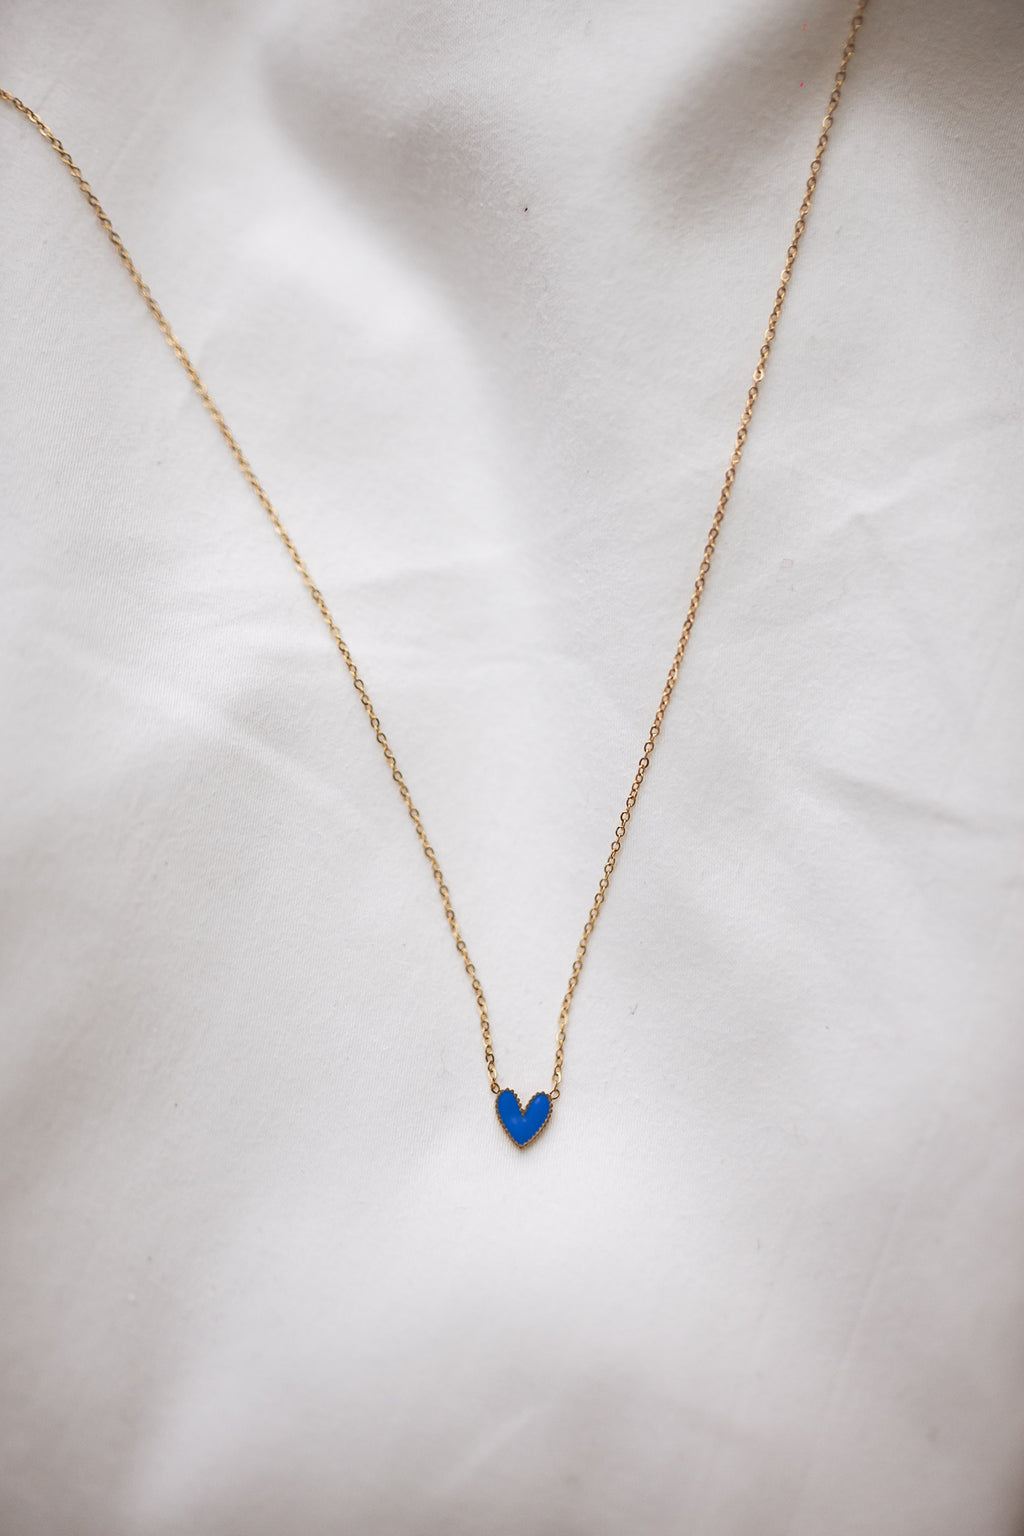 Blair necklace - Golden And Blue